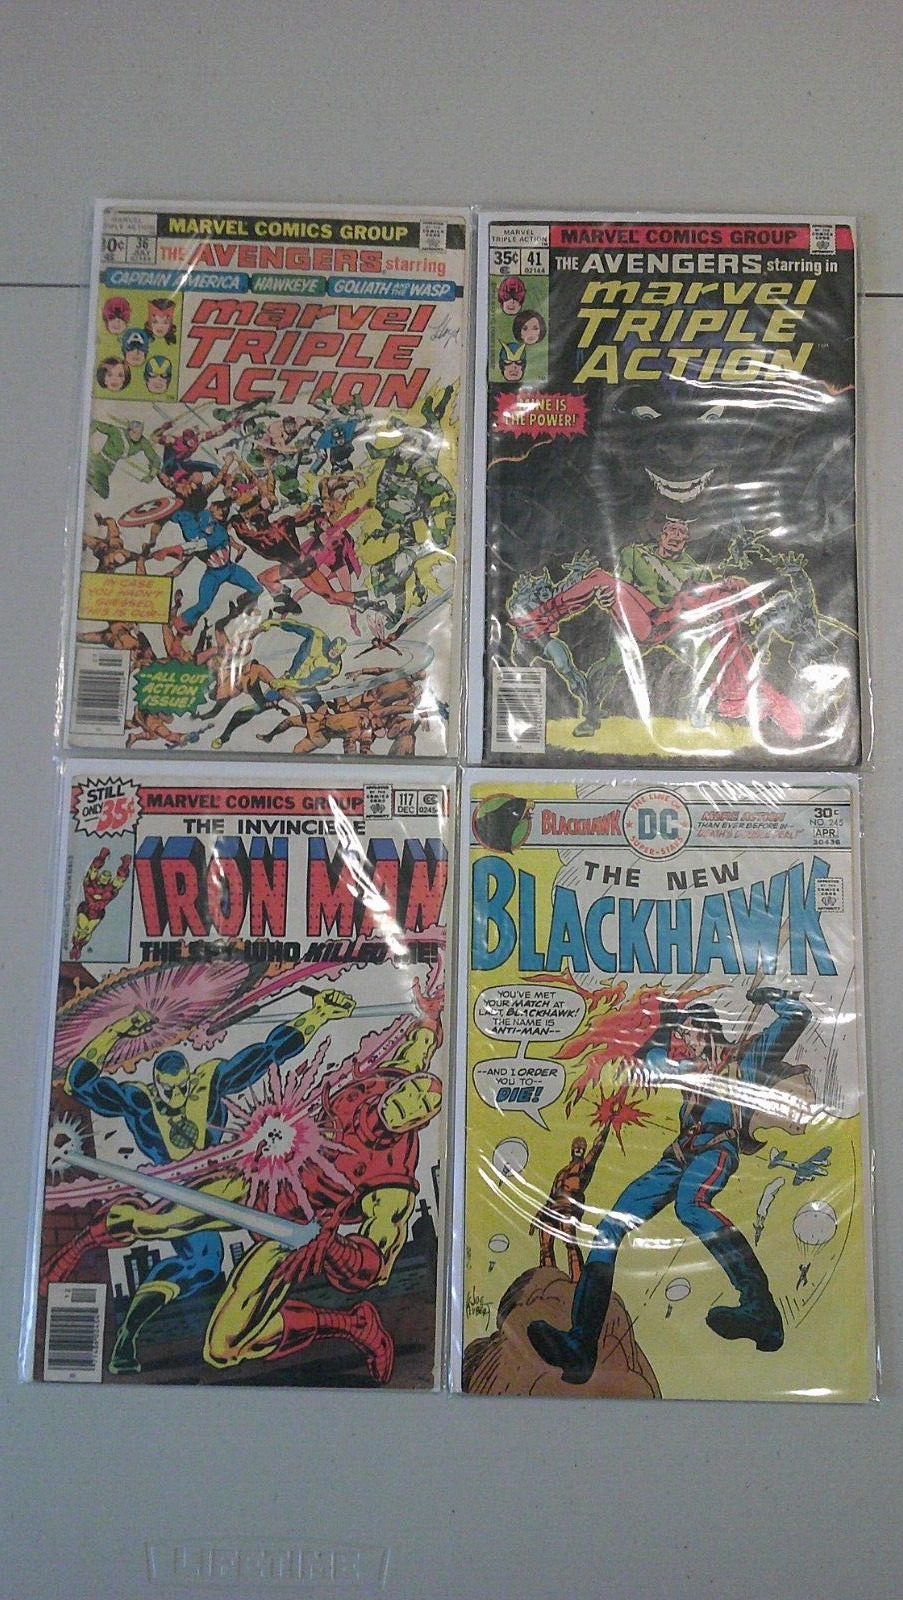 Marvel and DC Bronze Age Comic lot of 4 Triple Action #36,41, Black Hawk #245